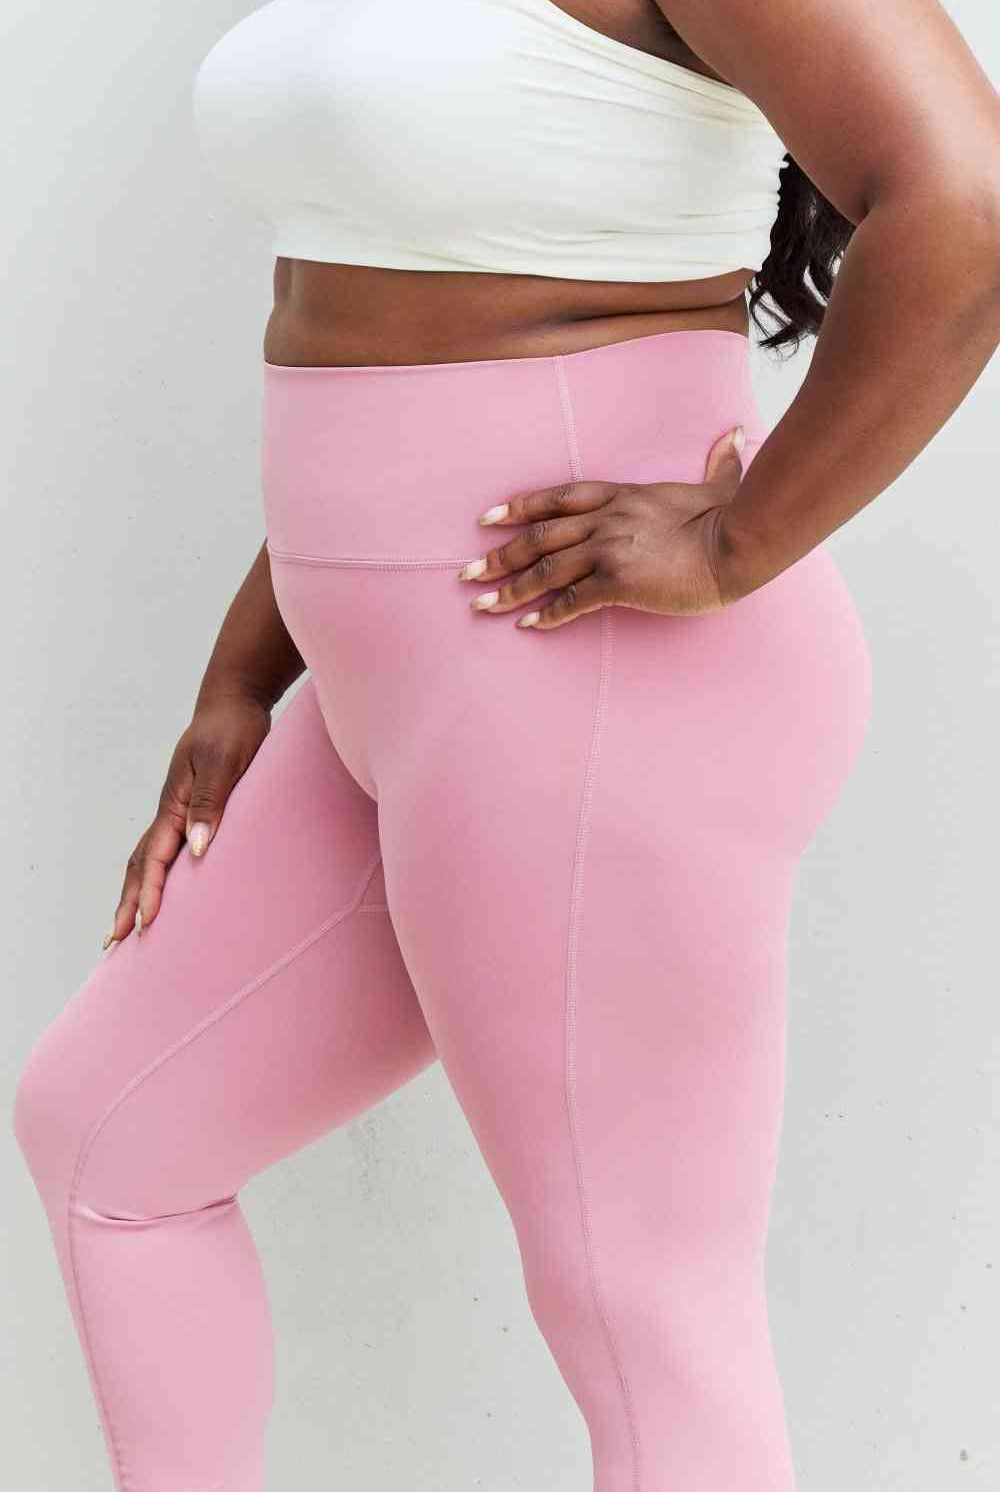 Thistle Fit For You Full Size High Waist Active Leggings in Light Rose activewear